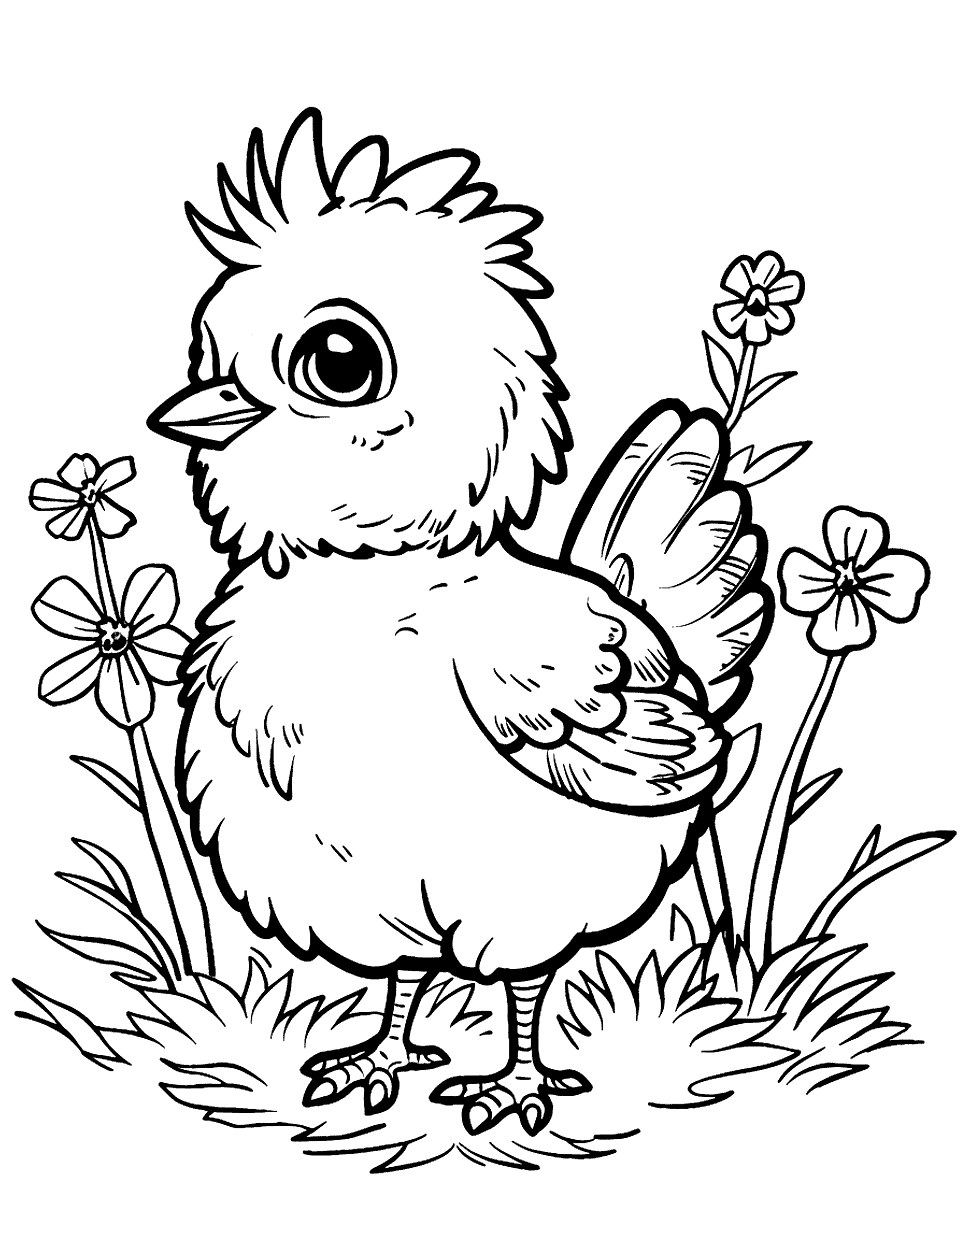 Cute Chicken in a Garden Coloring Page - A fluffy, cute chicken standing in a small garden surrounded by flowers.